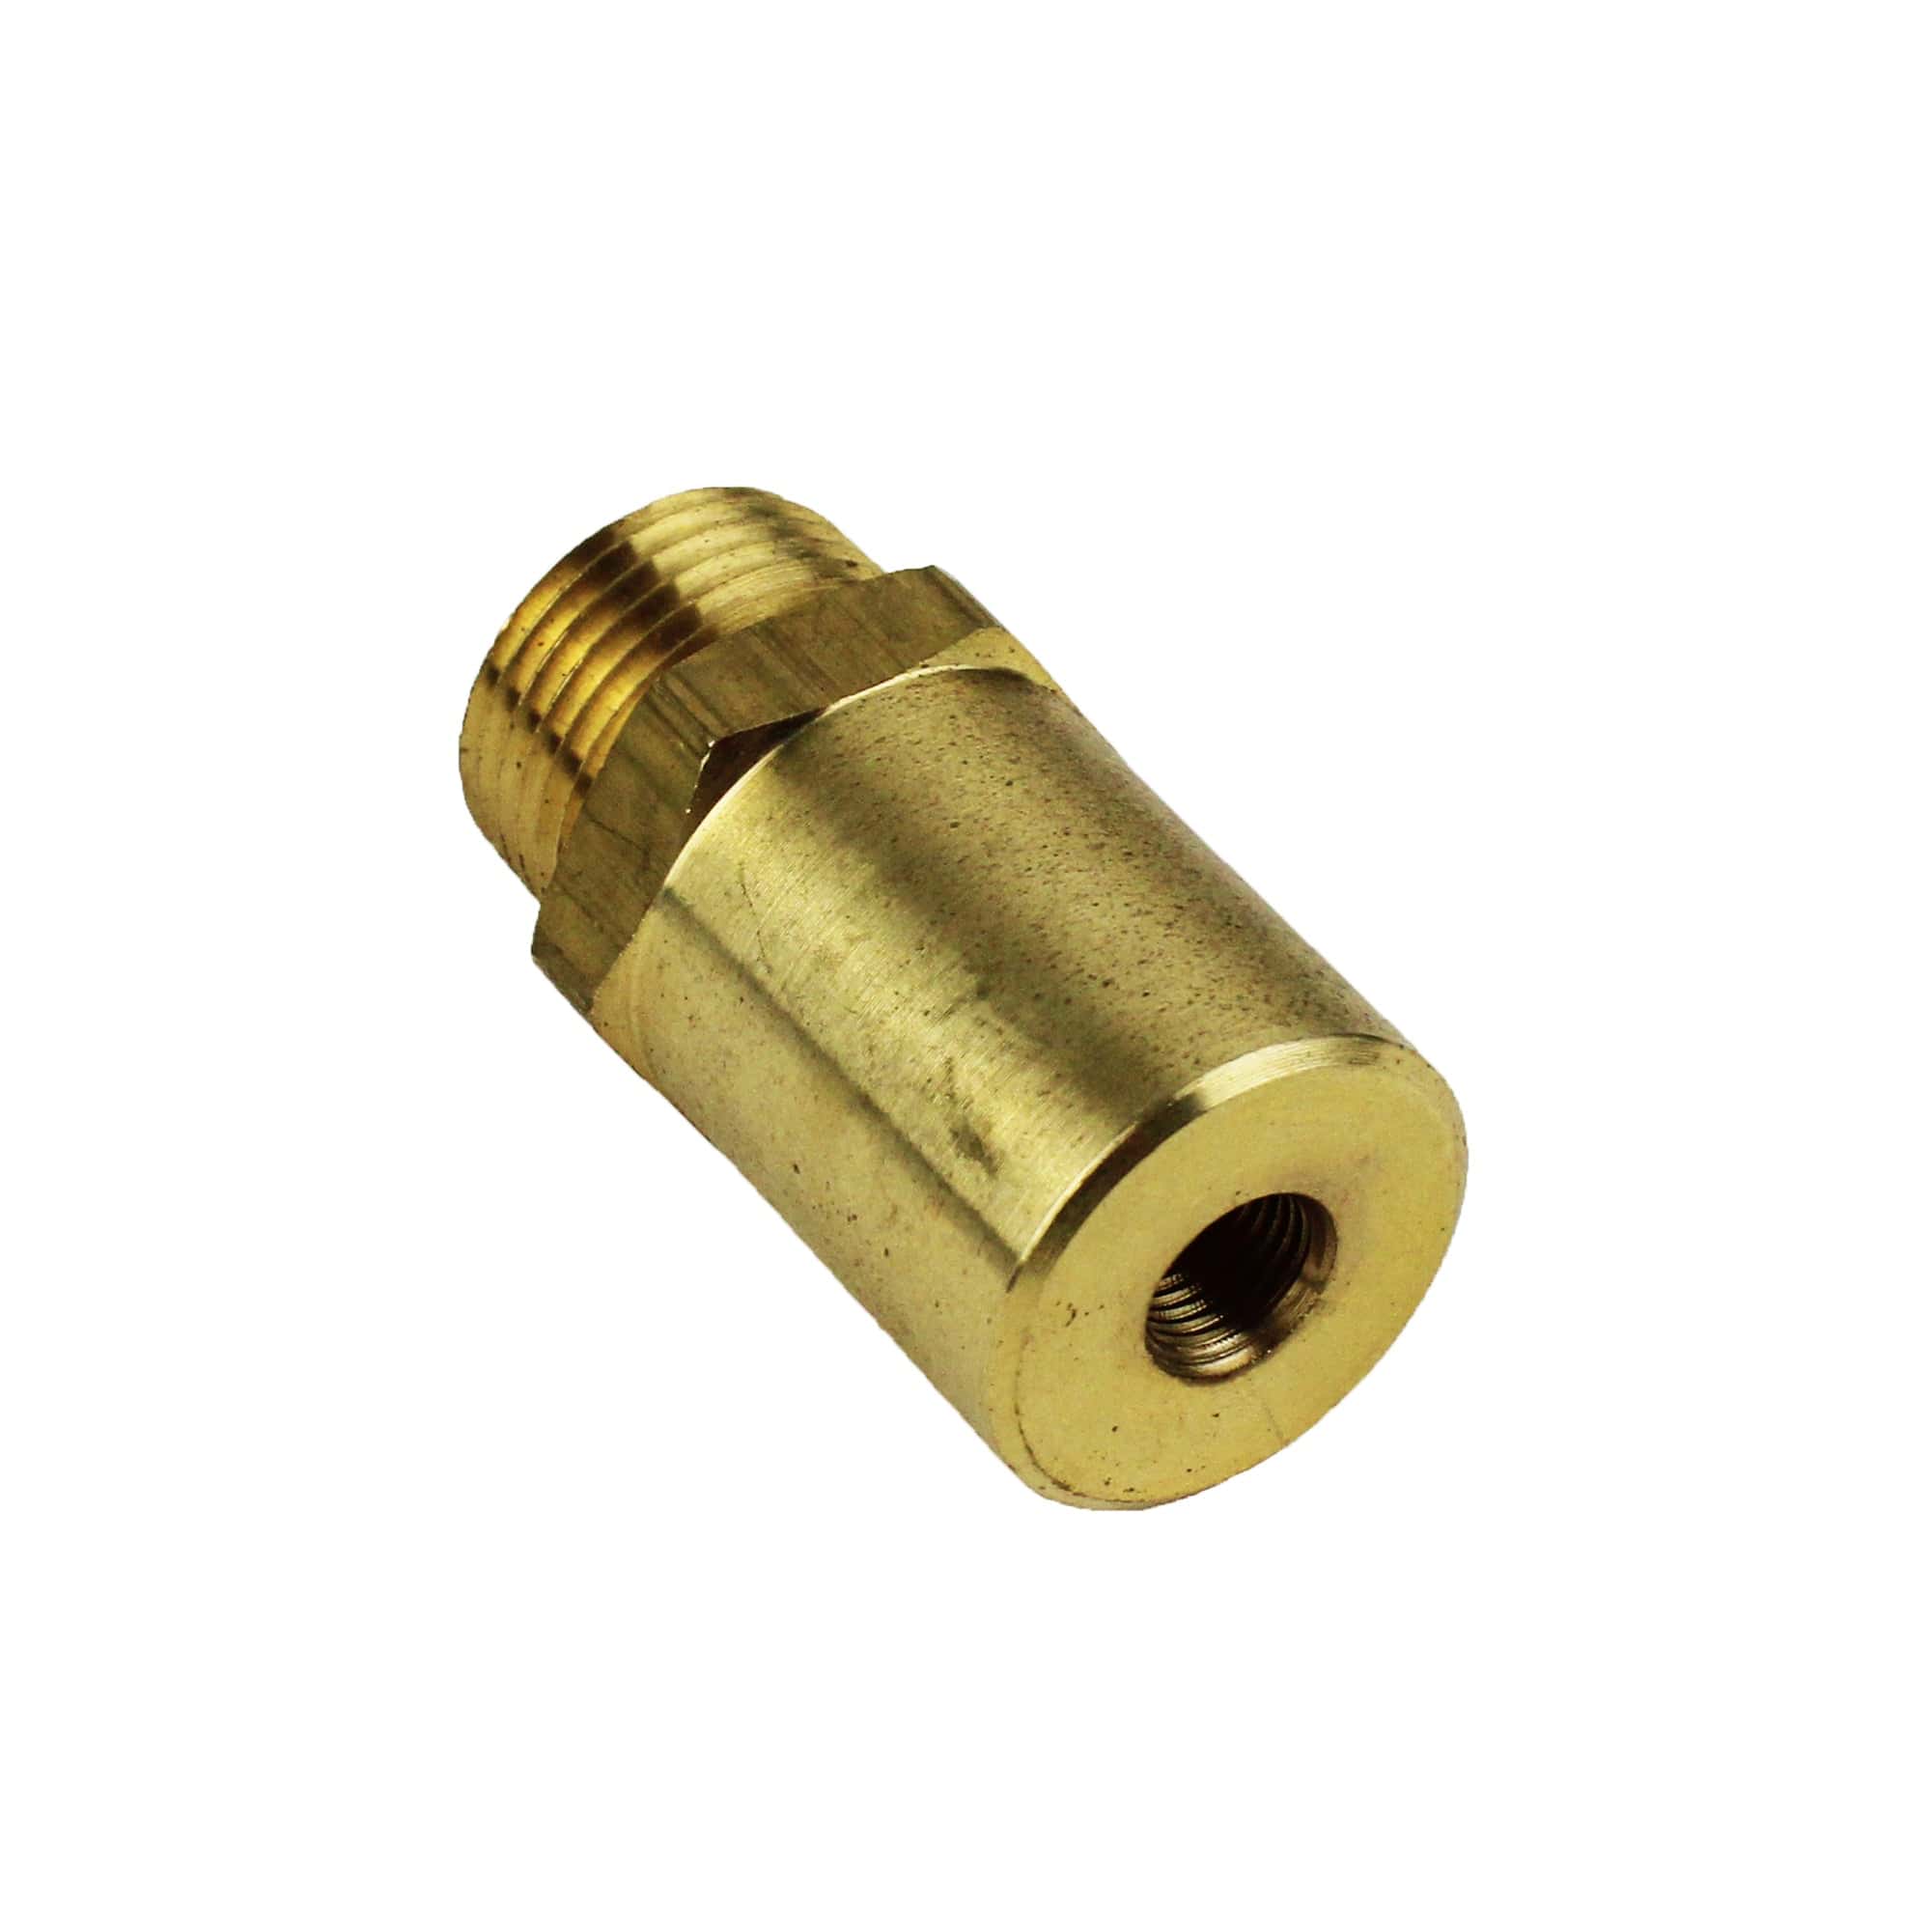 Dometic 92065 Atwood Water Heater Orifice Fitting